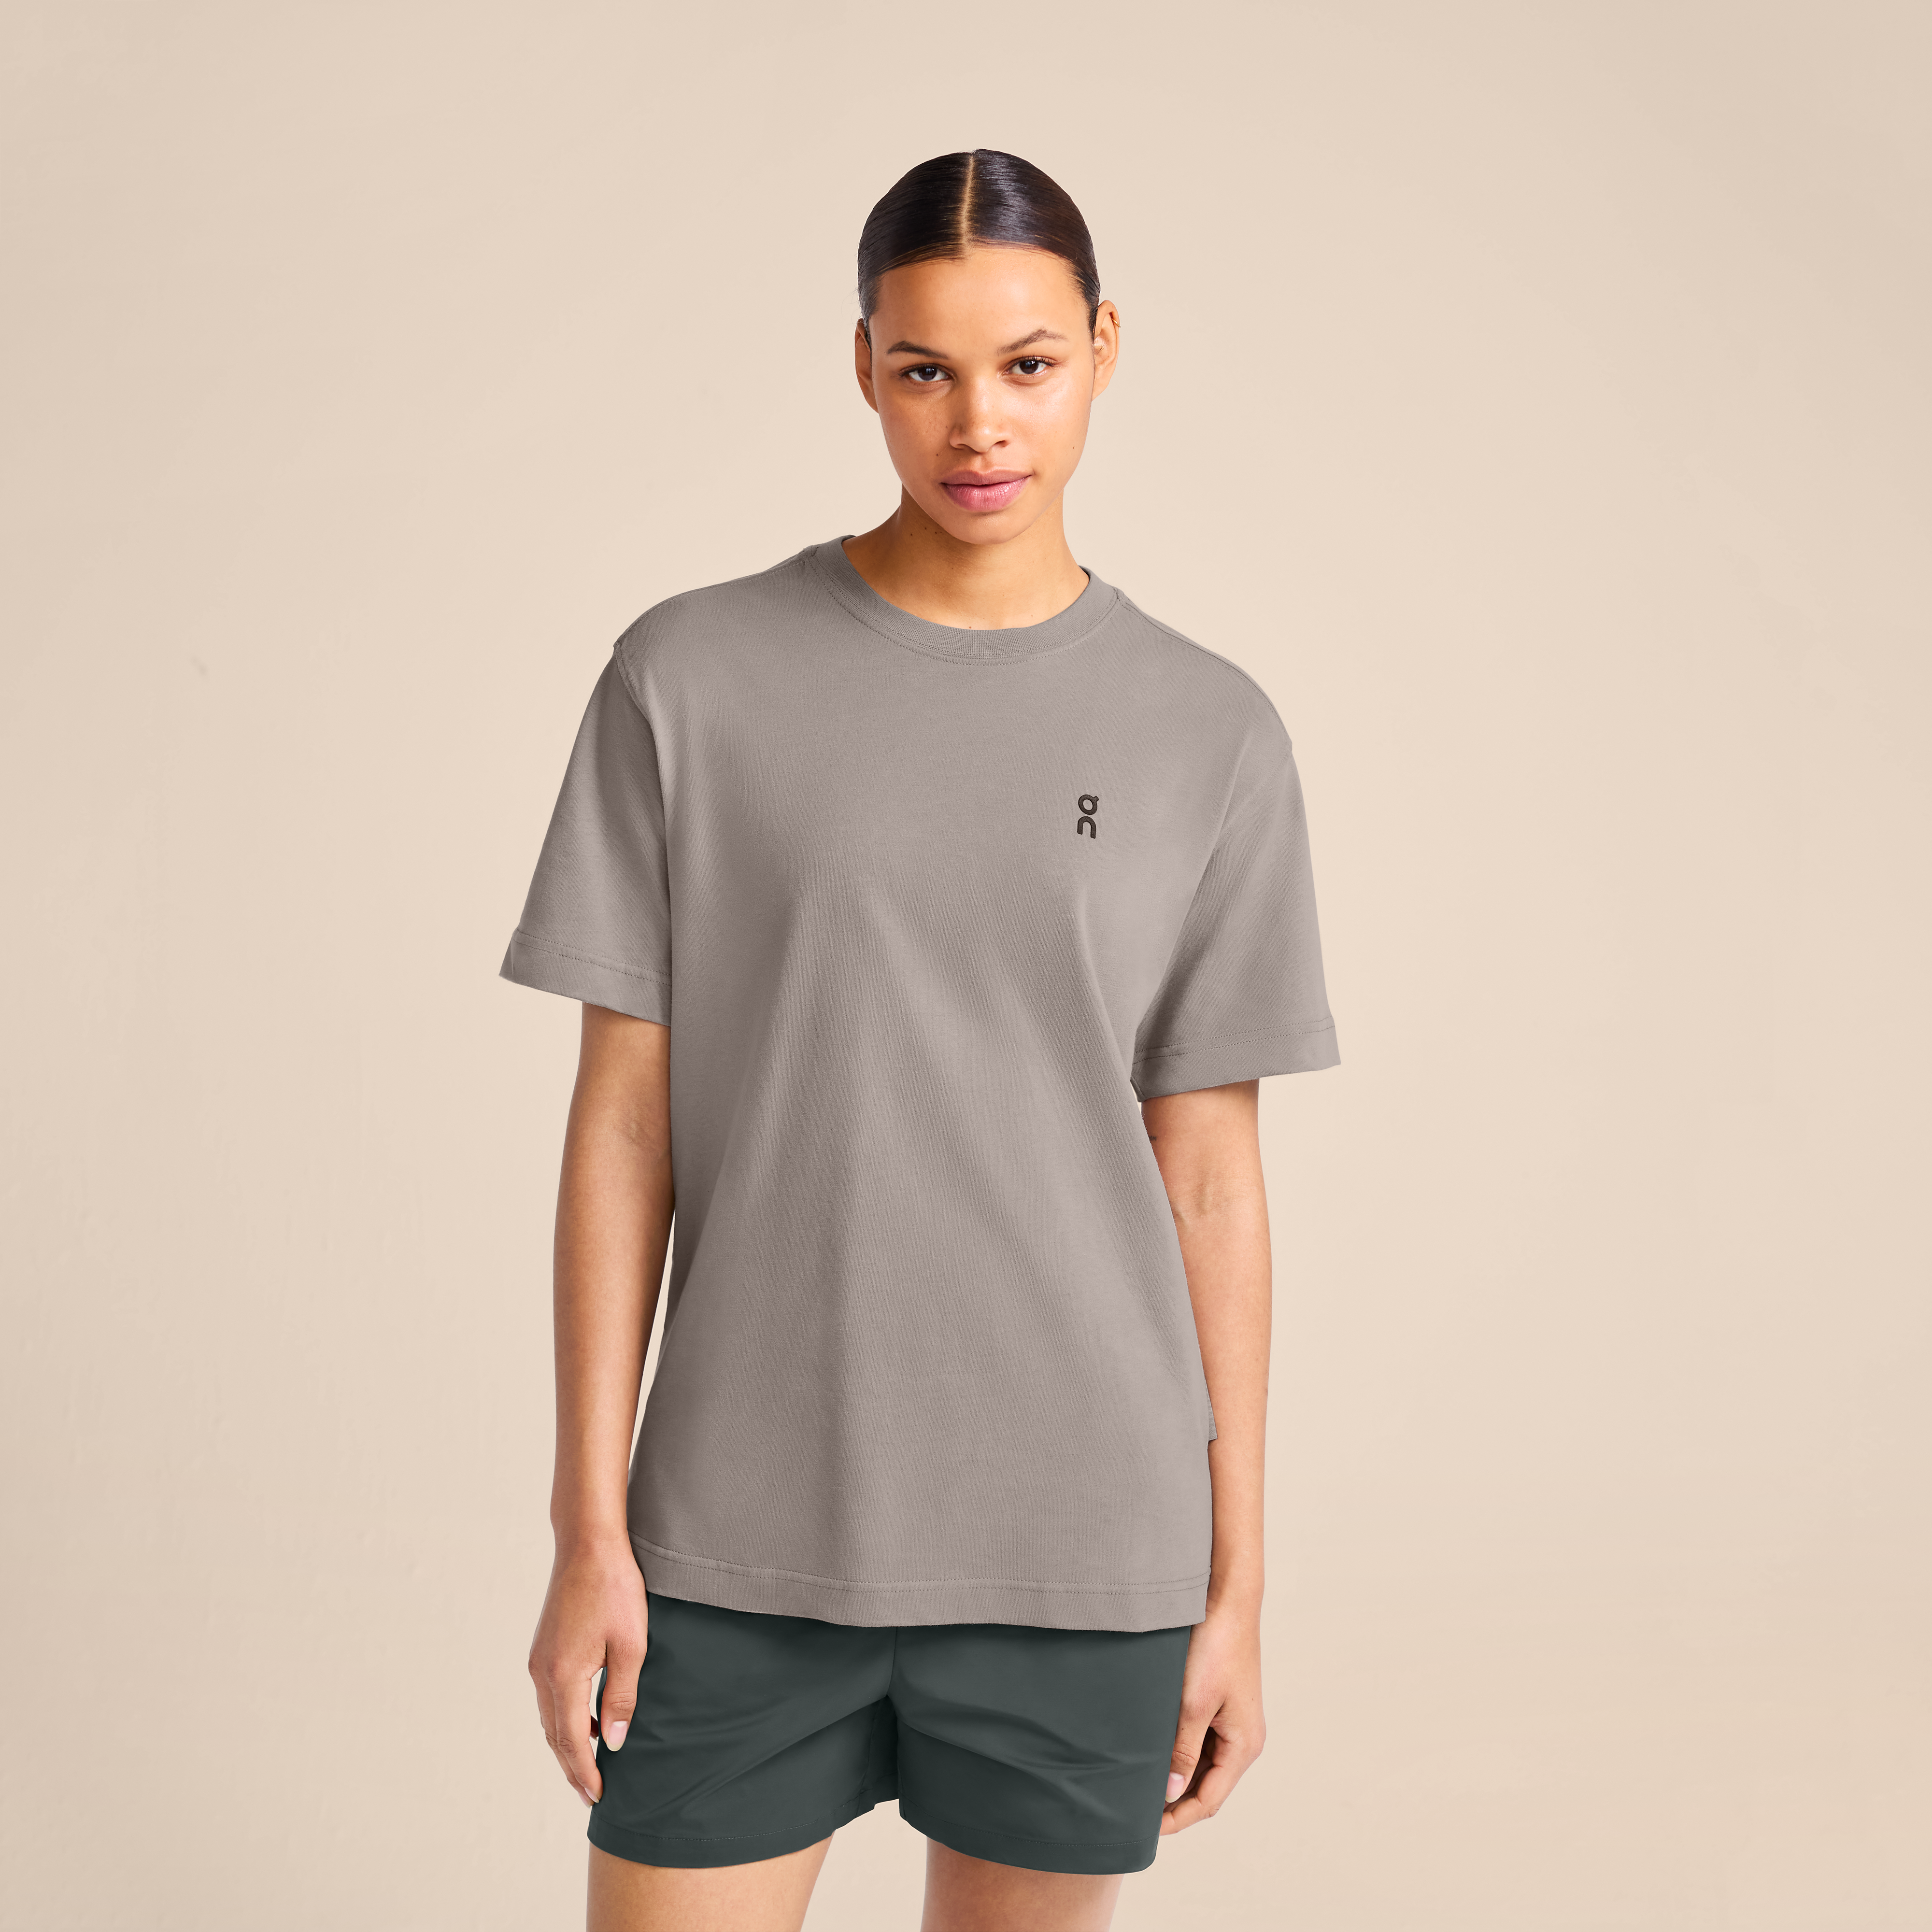 On Club T Grey Women Travel, recovery, all-day wear Tops and t-shirts